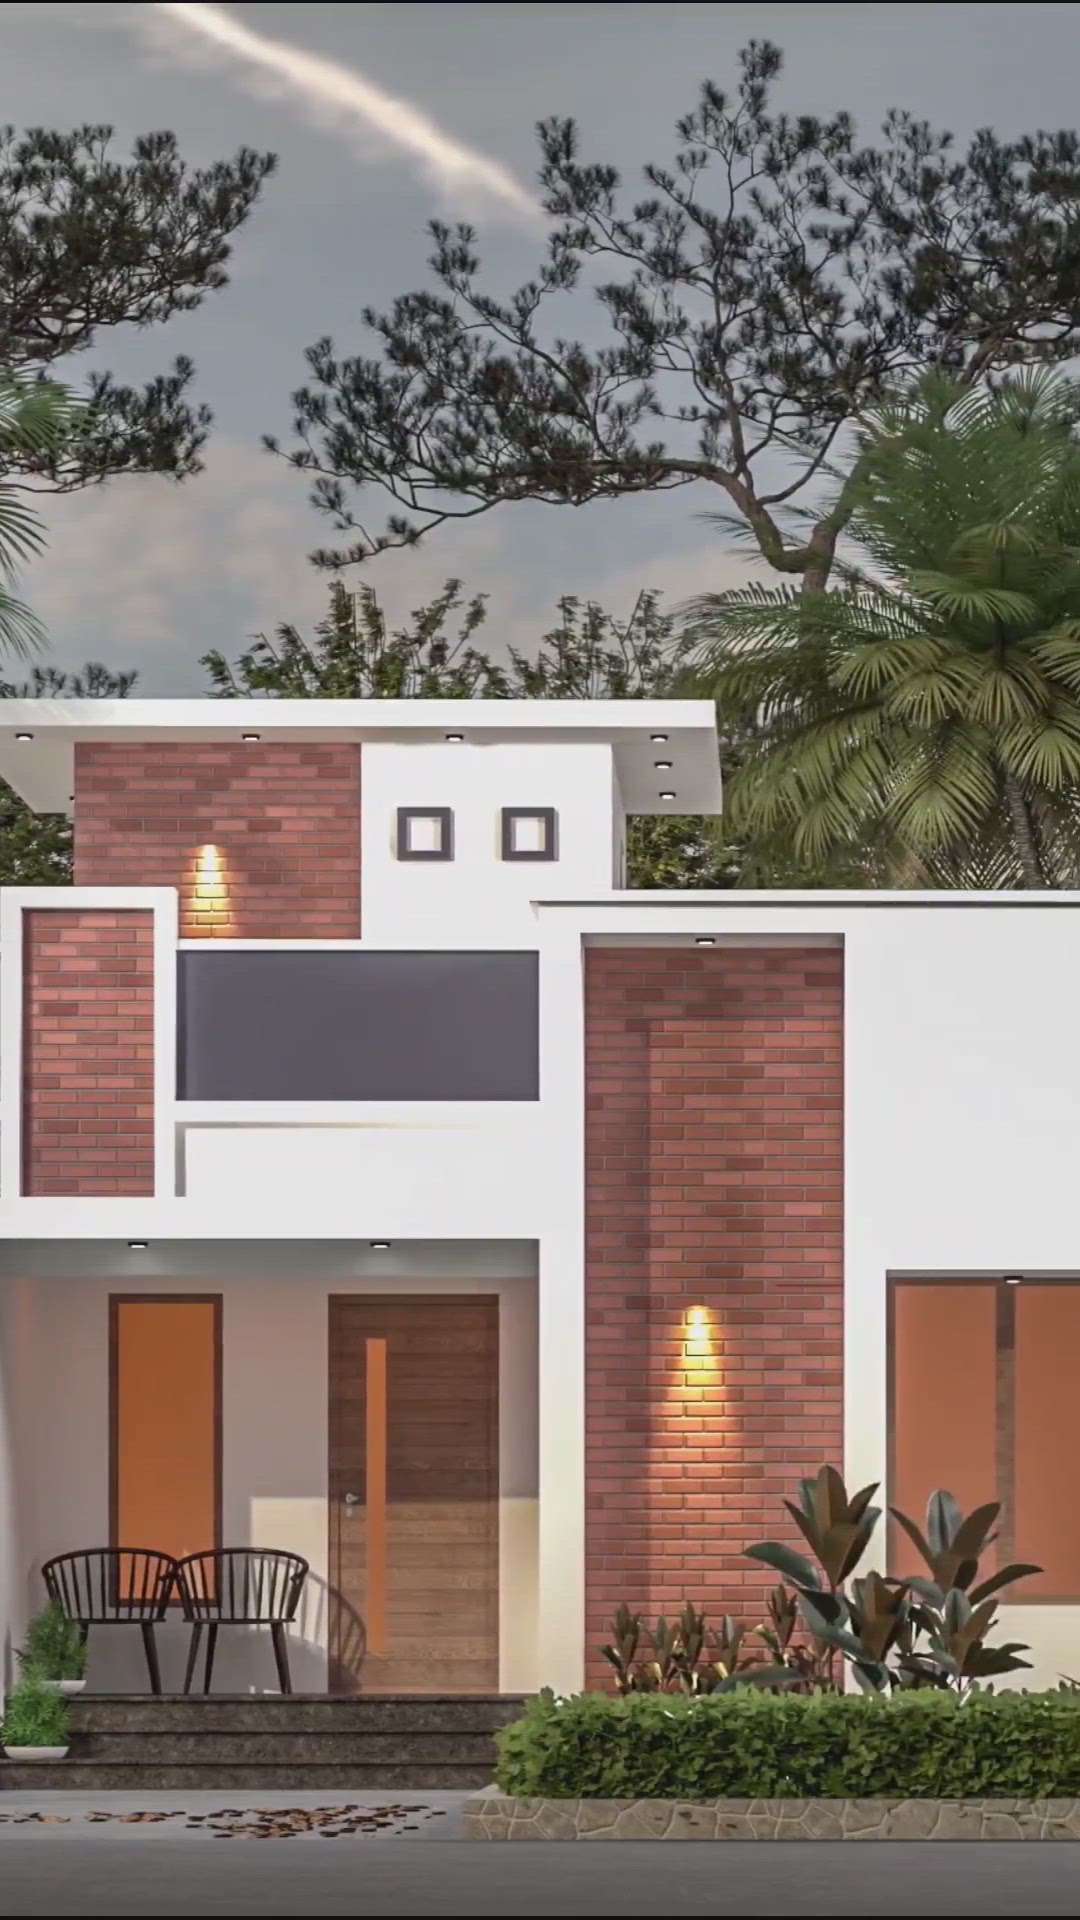 budget home designed for a small family. Total area 700 Sqft. Specification: 2bhk
#lowbudgethousekerala #2BHKHouse #modernelevation